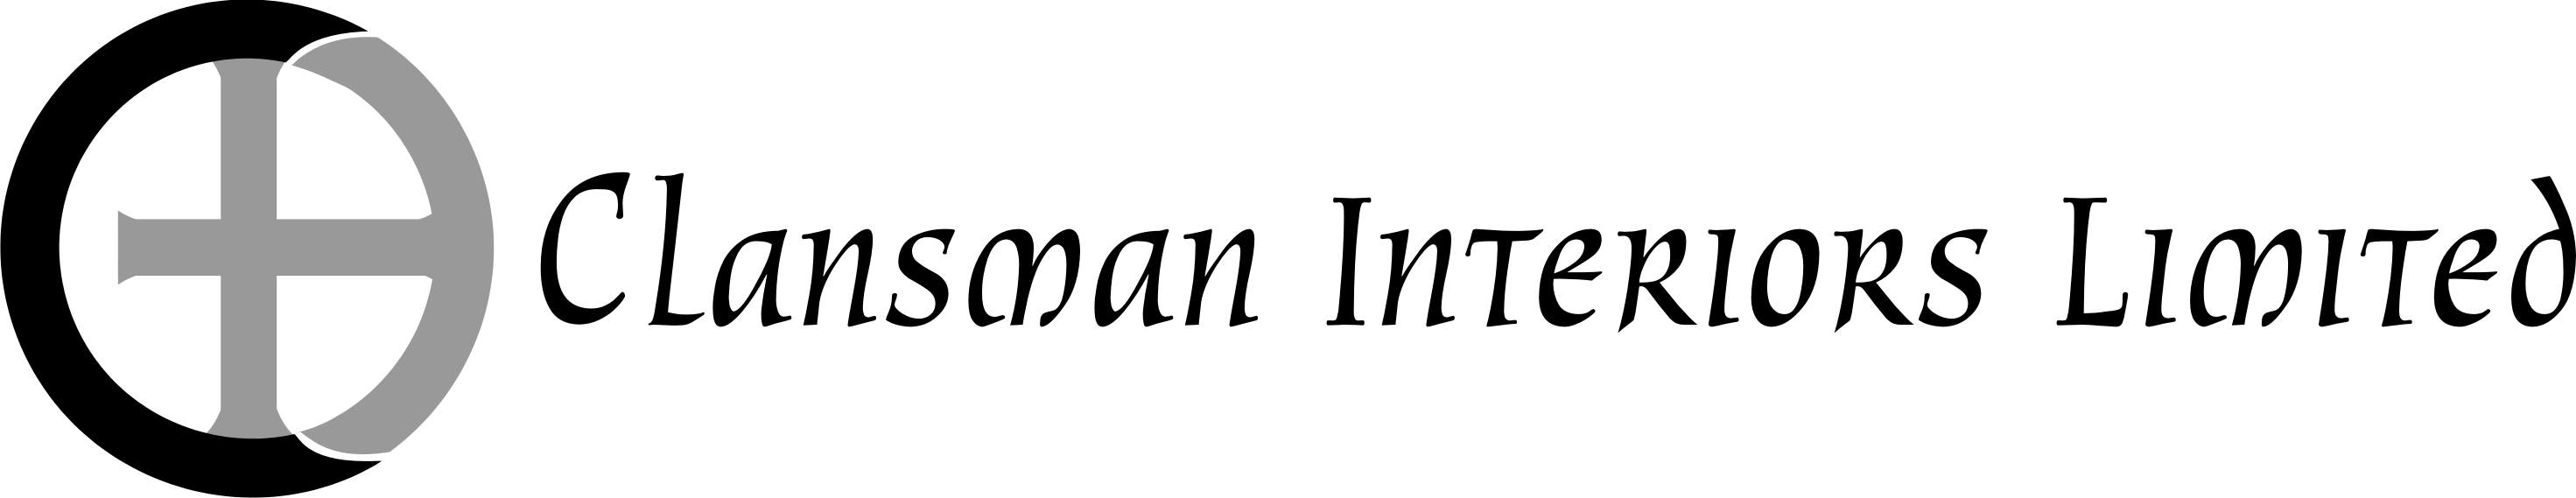 logo for Clansman Interiors Limited